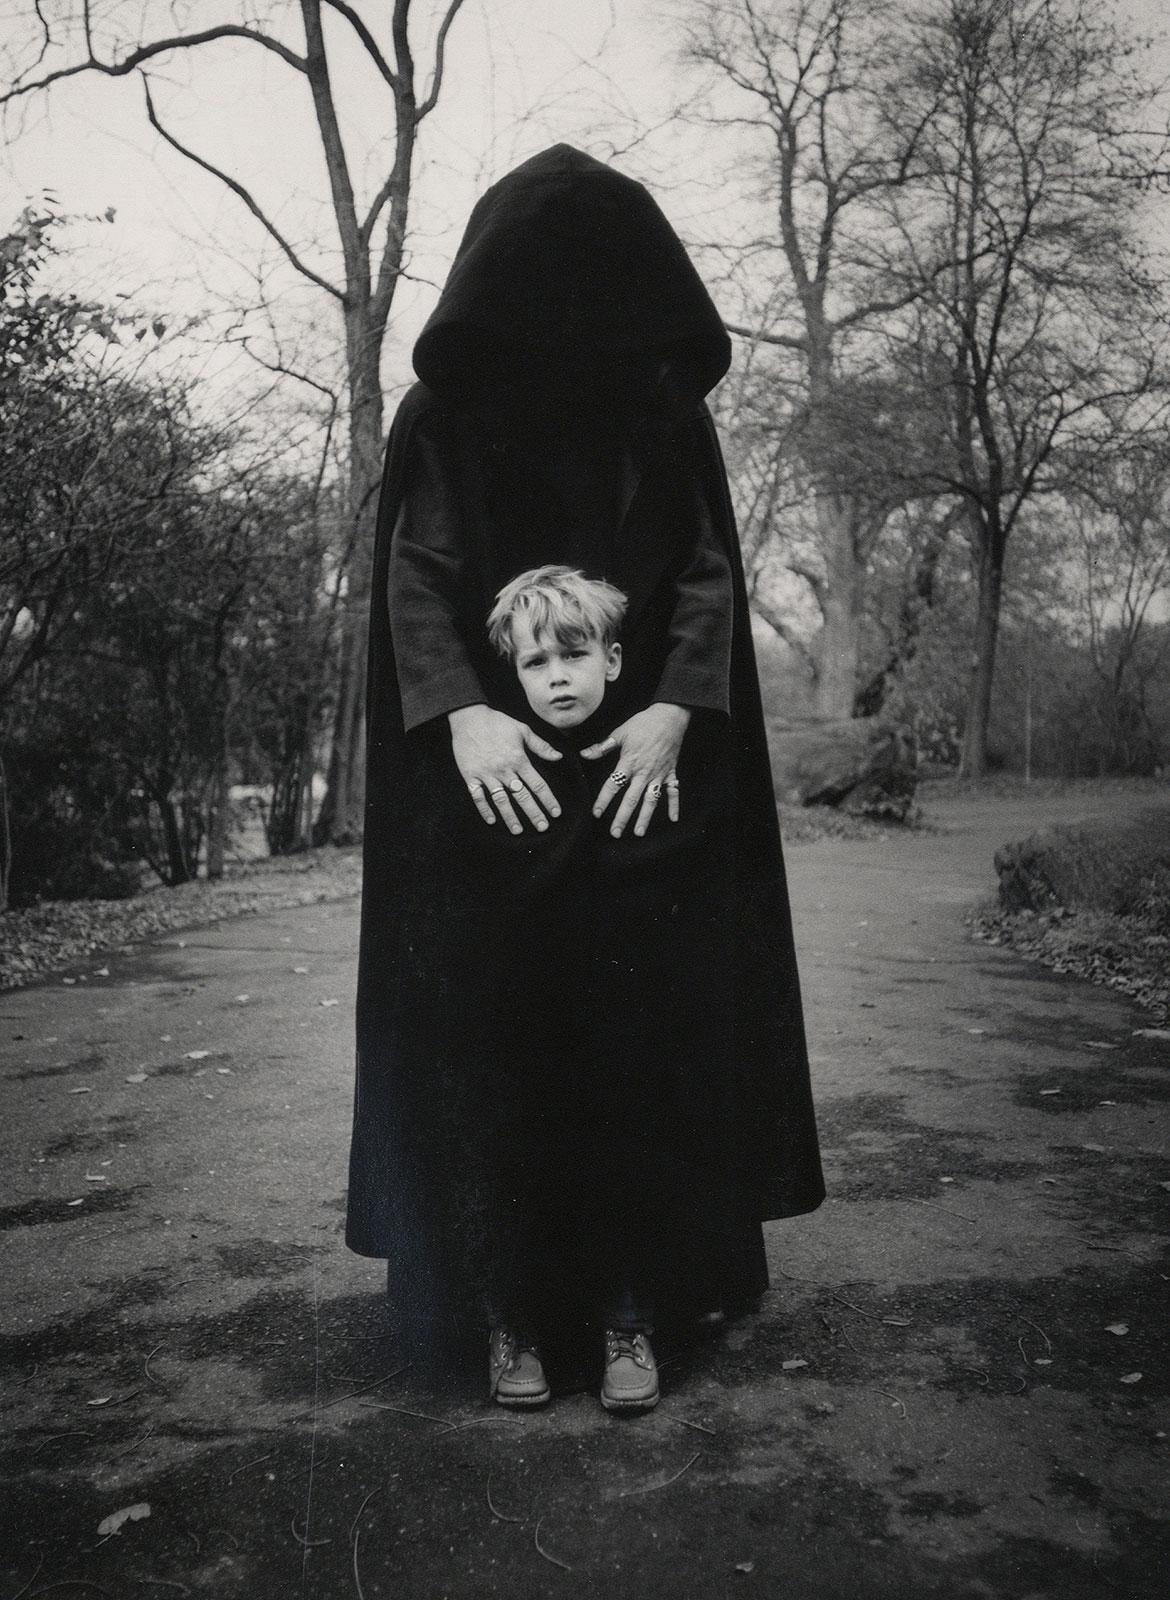 Death Fantasy (a haunting image which portrays a boy's worst nightmare) - Photograph by Arthur Tress